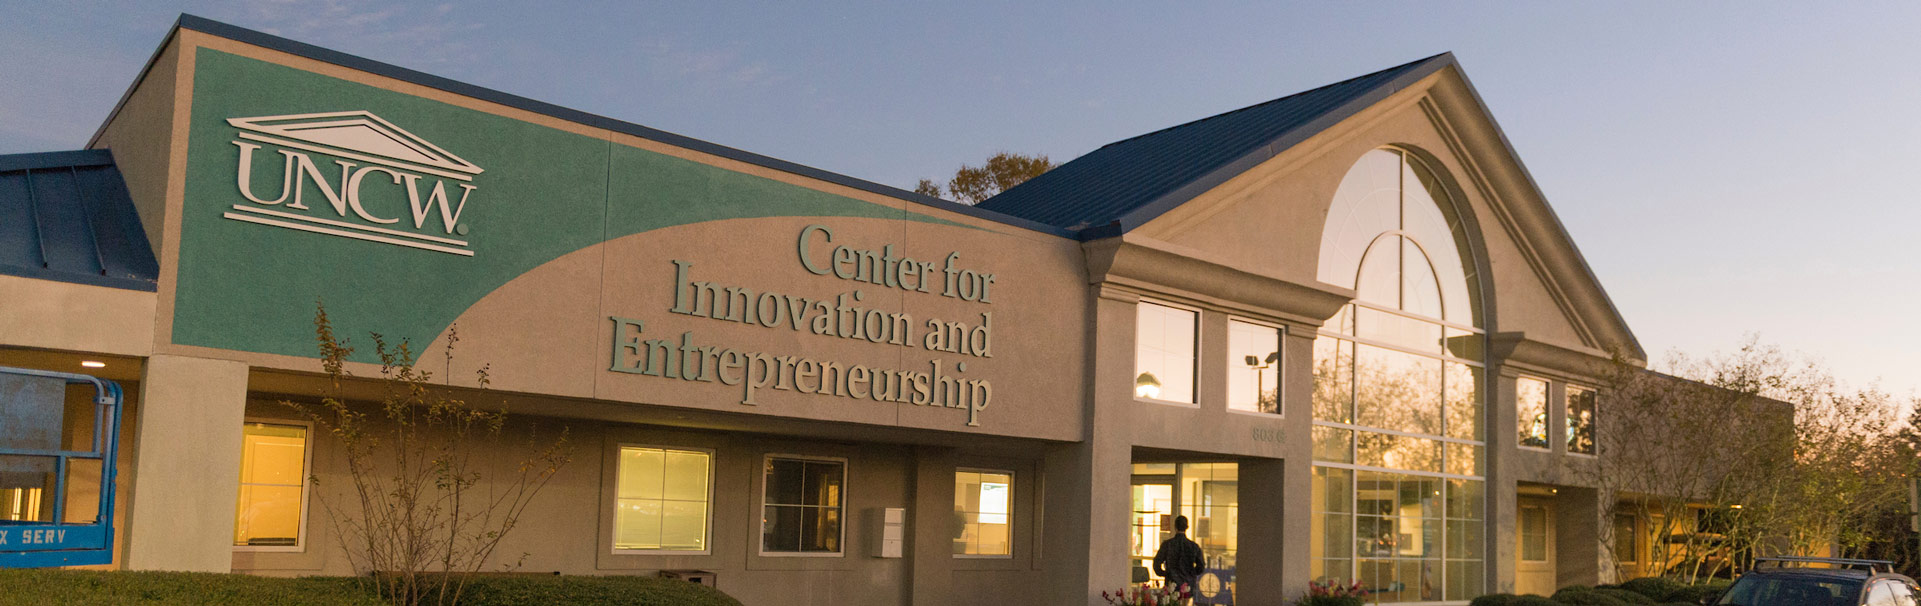 Front of the Center for Innovation and Entrepreneurship building